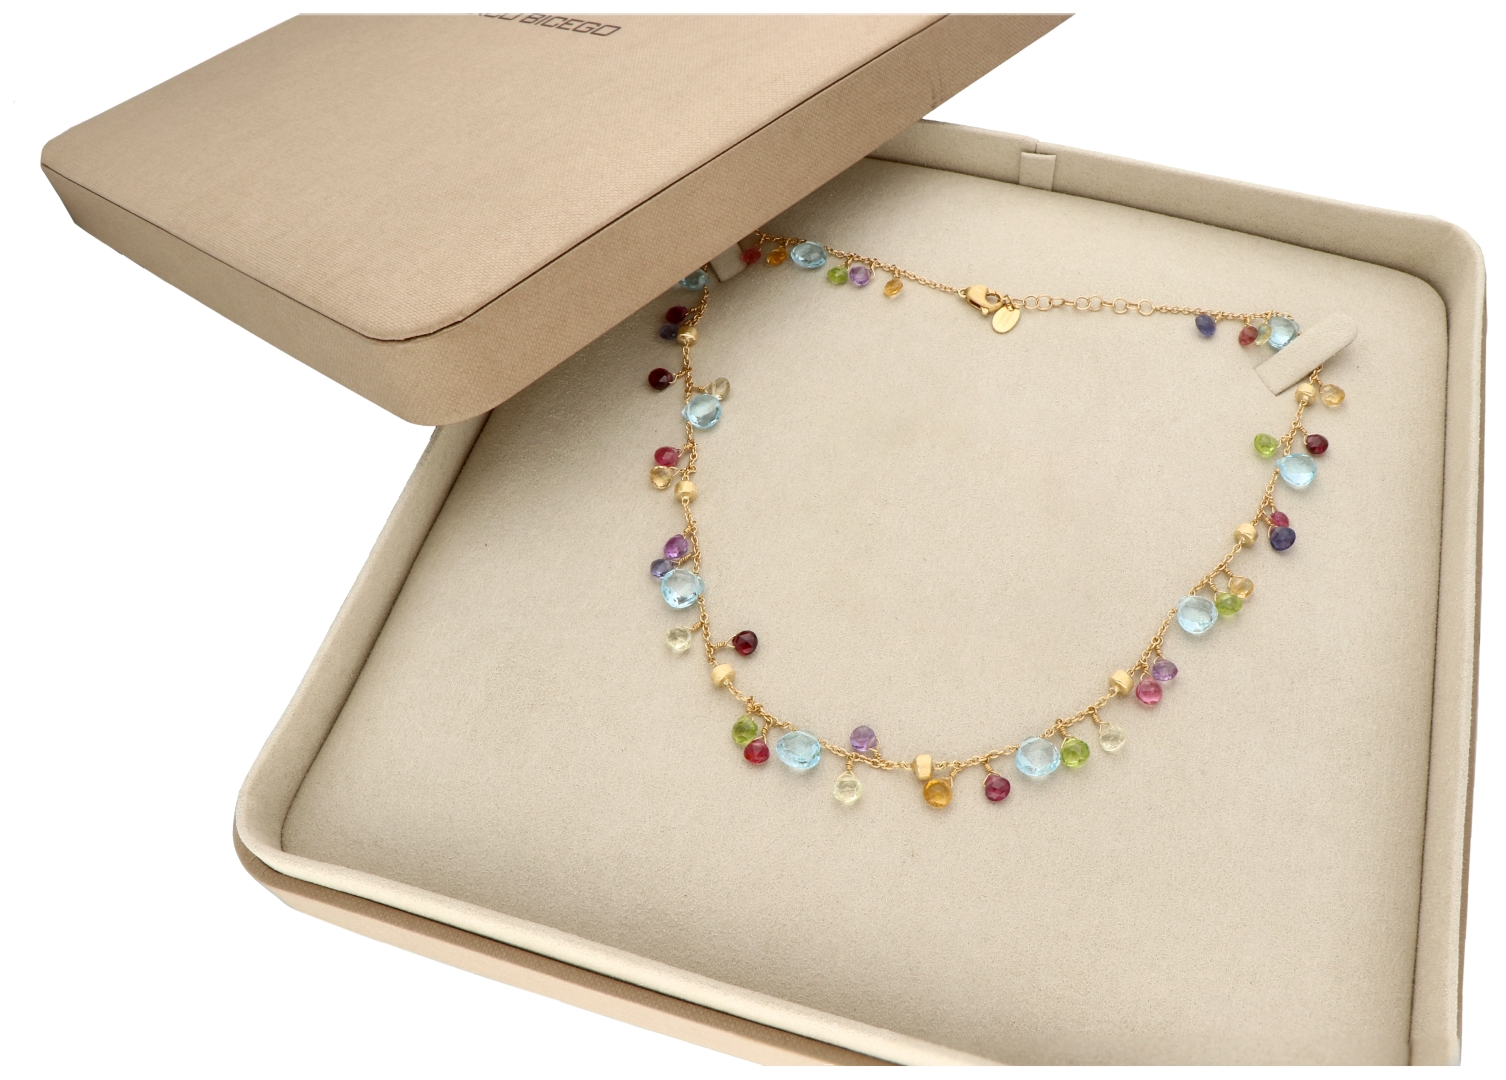 No Reserve - Marco Bicego 'Paradise' collection 18K yellow gold necklace with mix of gemstones - Image 4 of 5